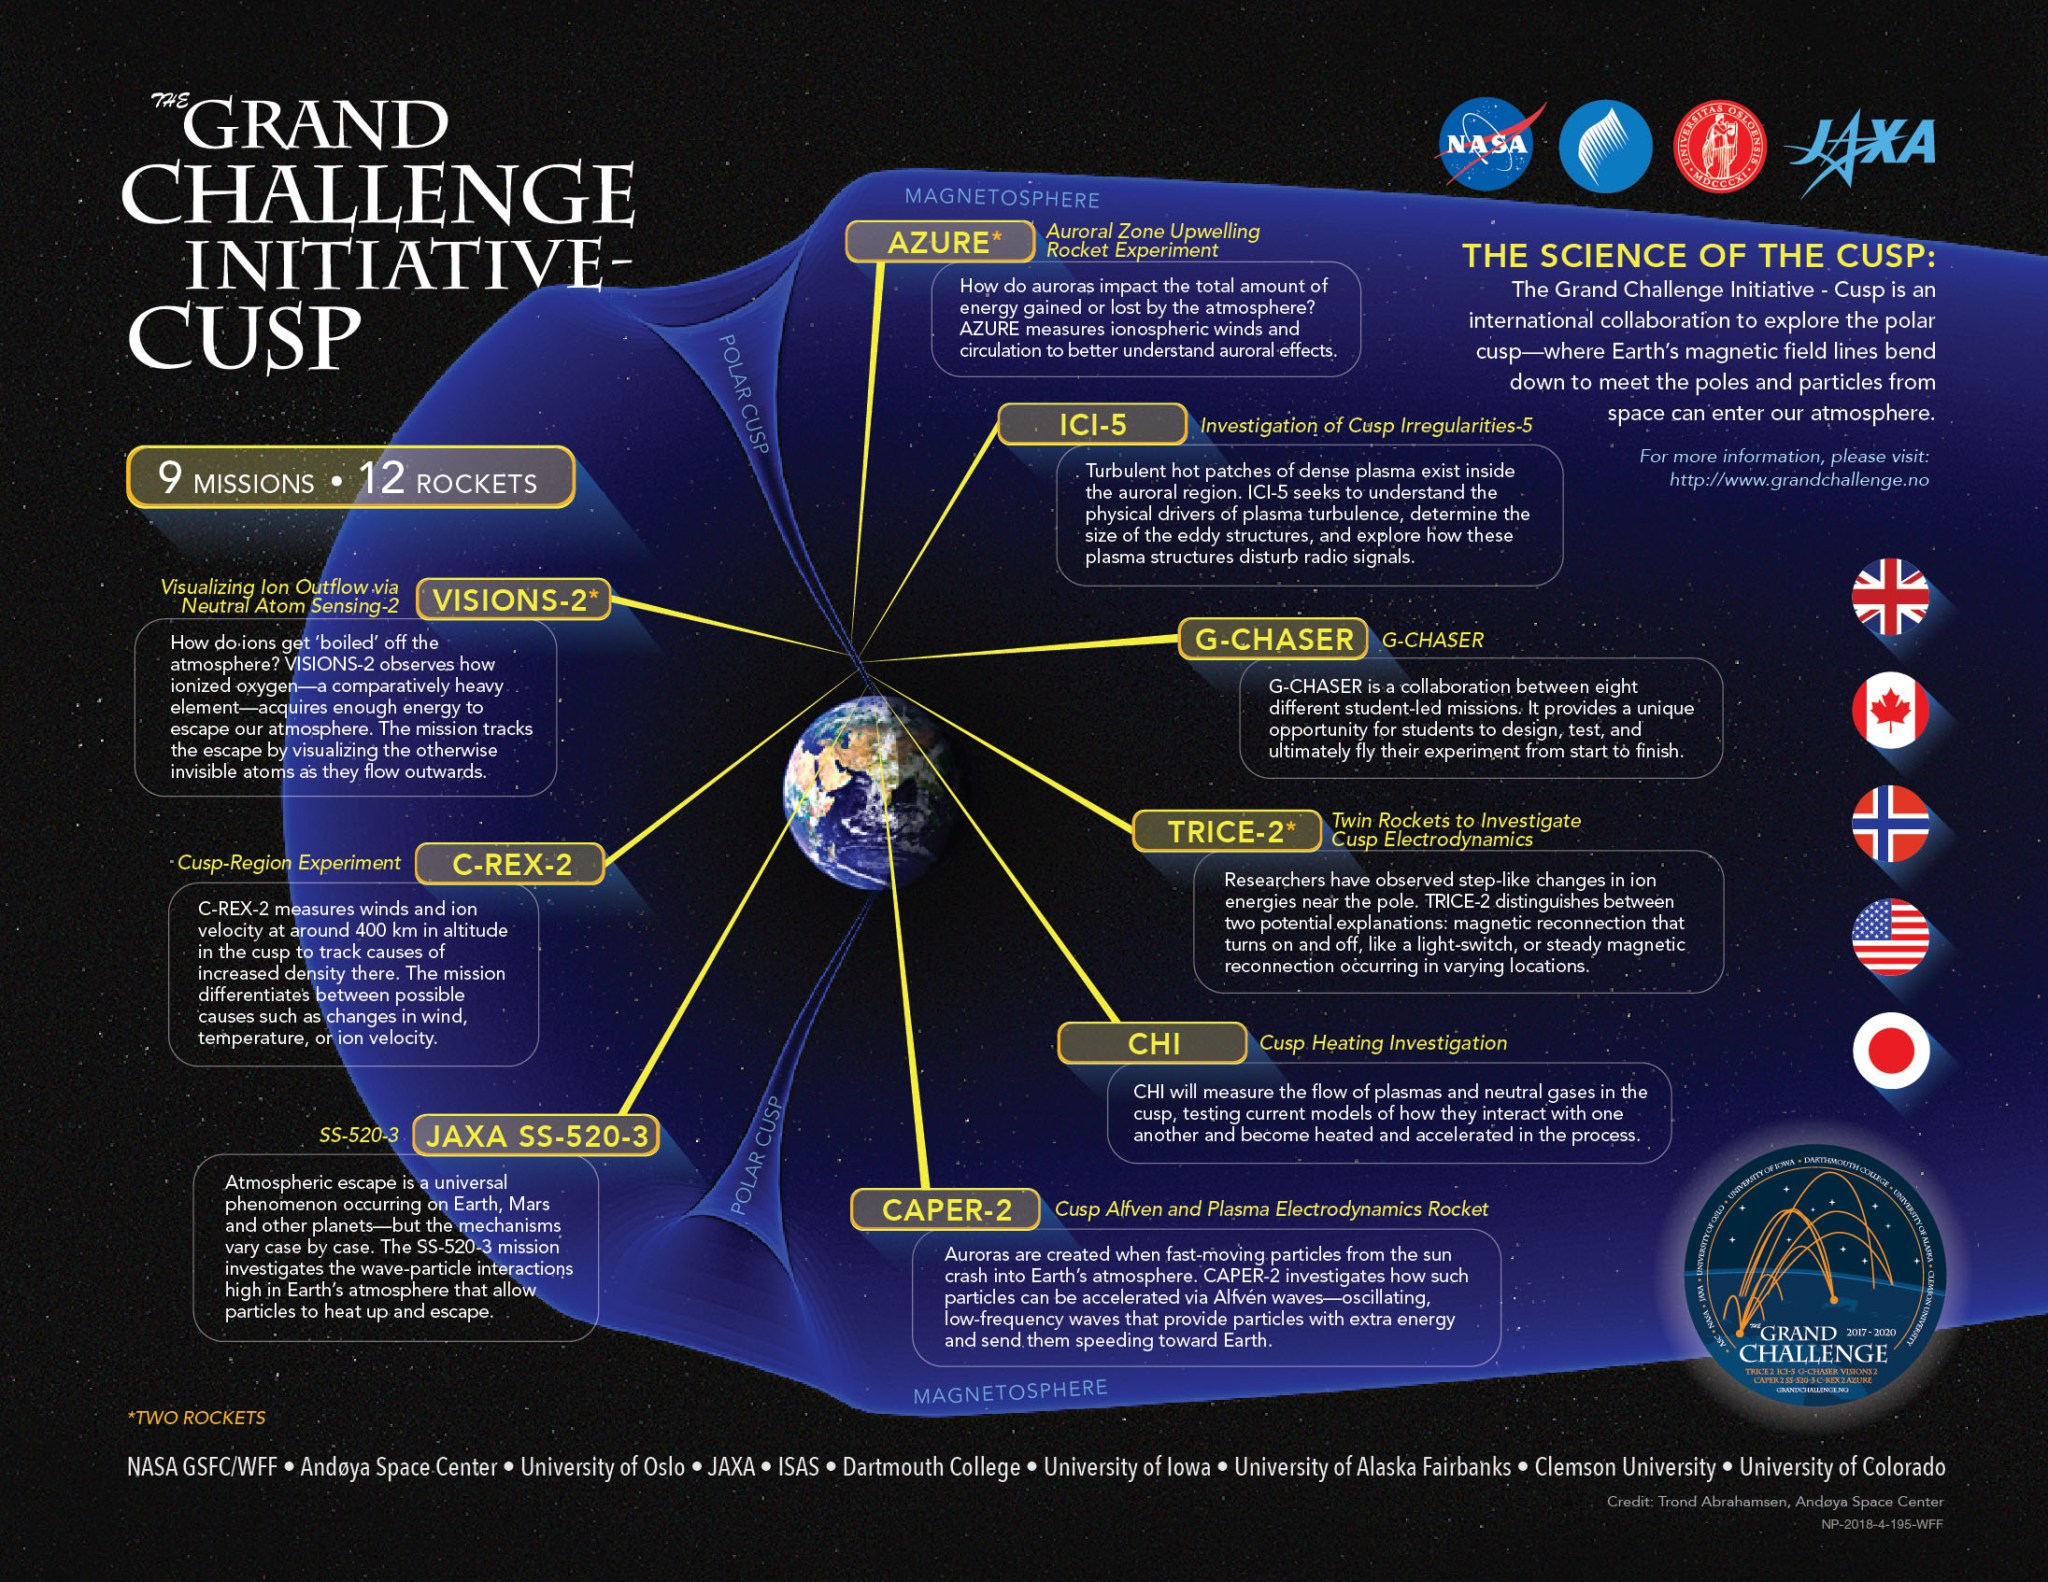 The Grand Challenge Initiative – Cusp missions infographic